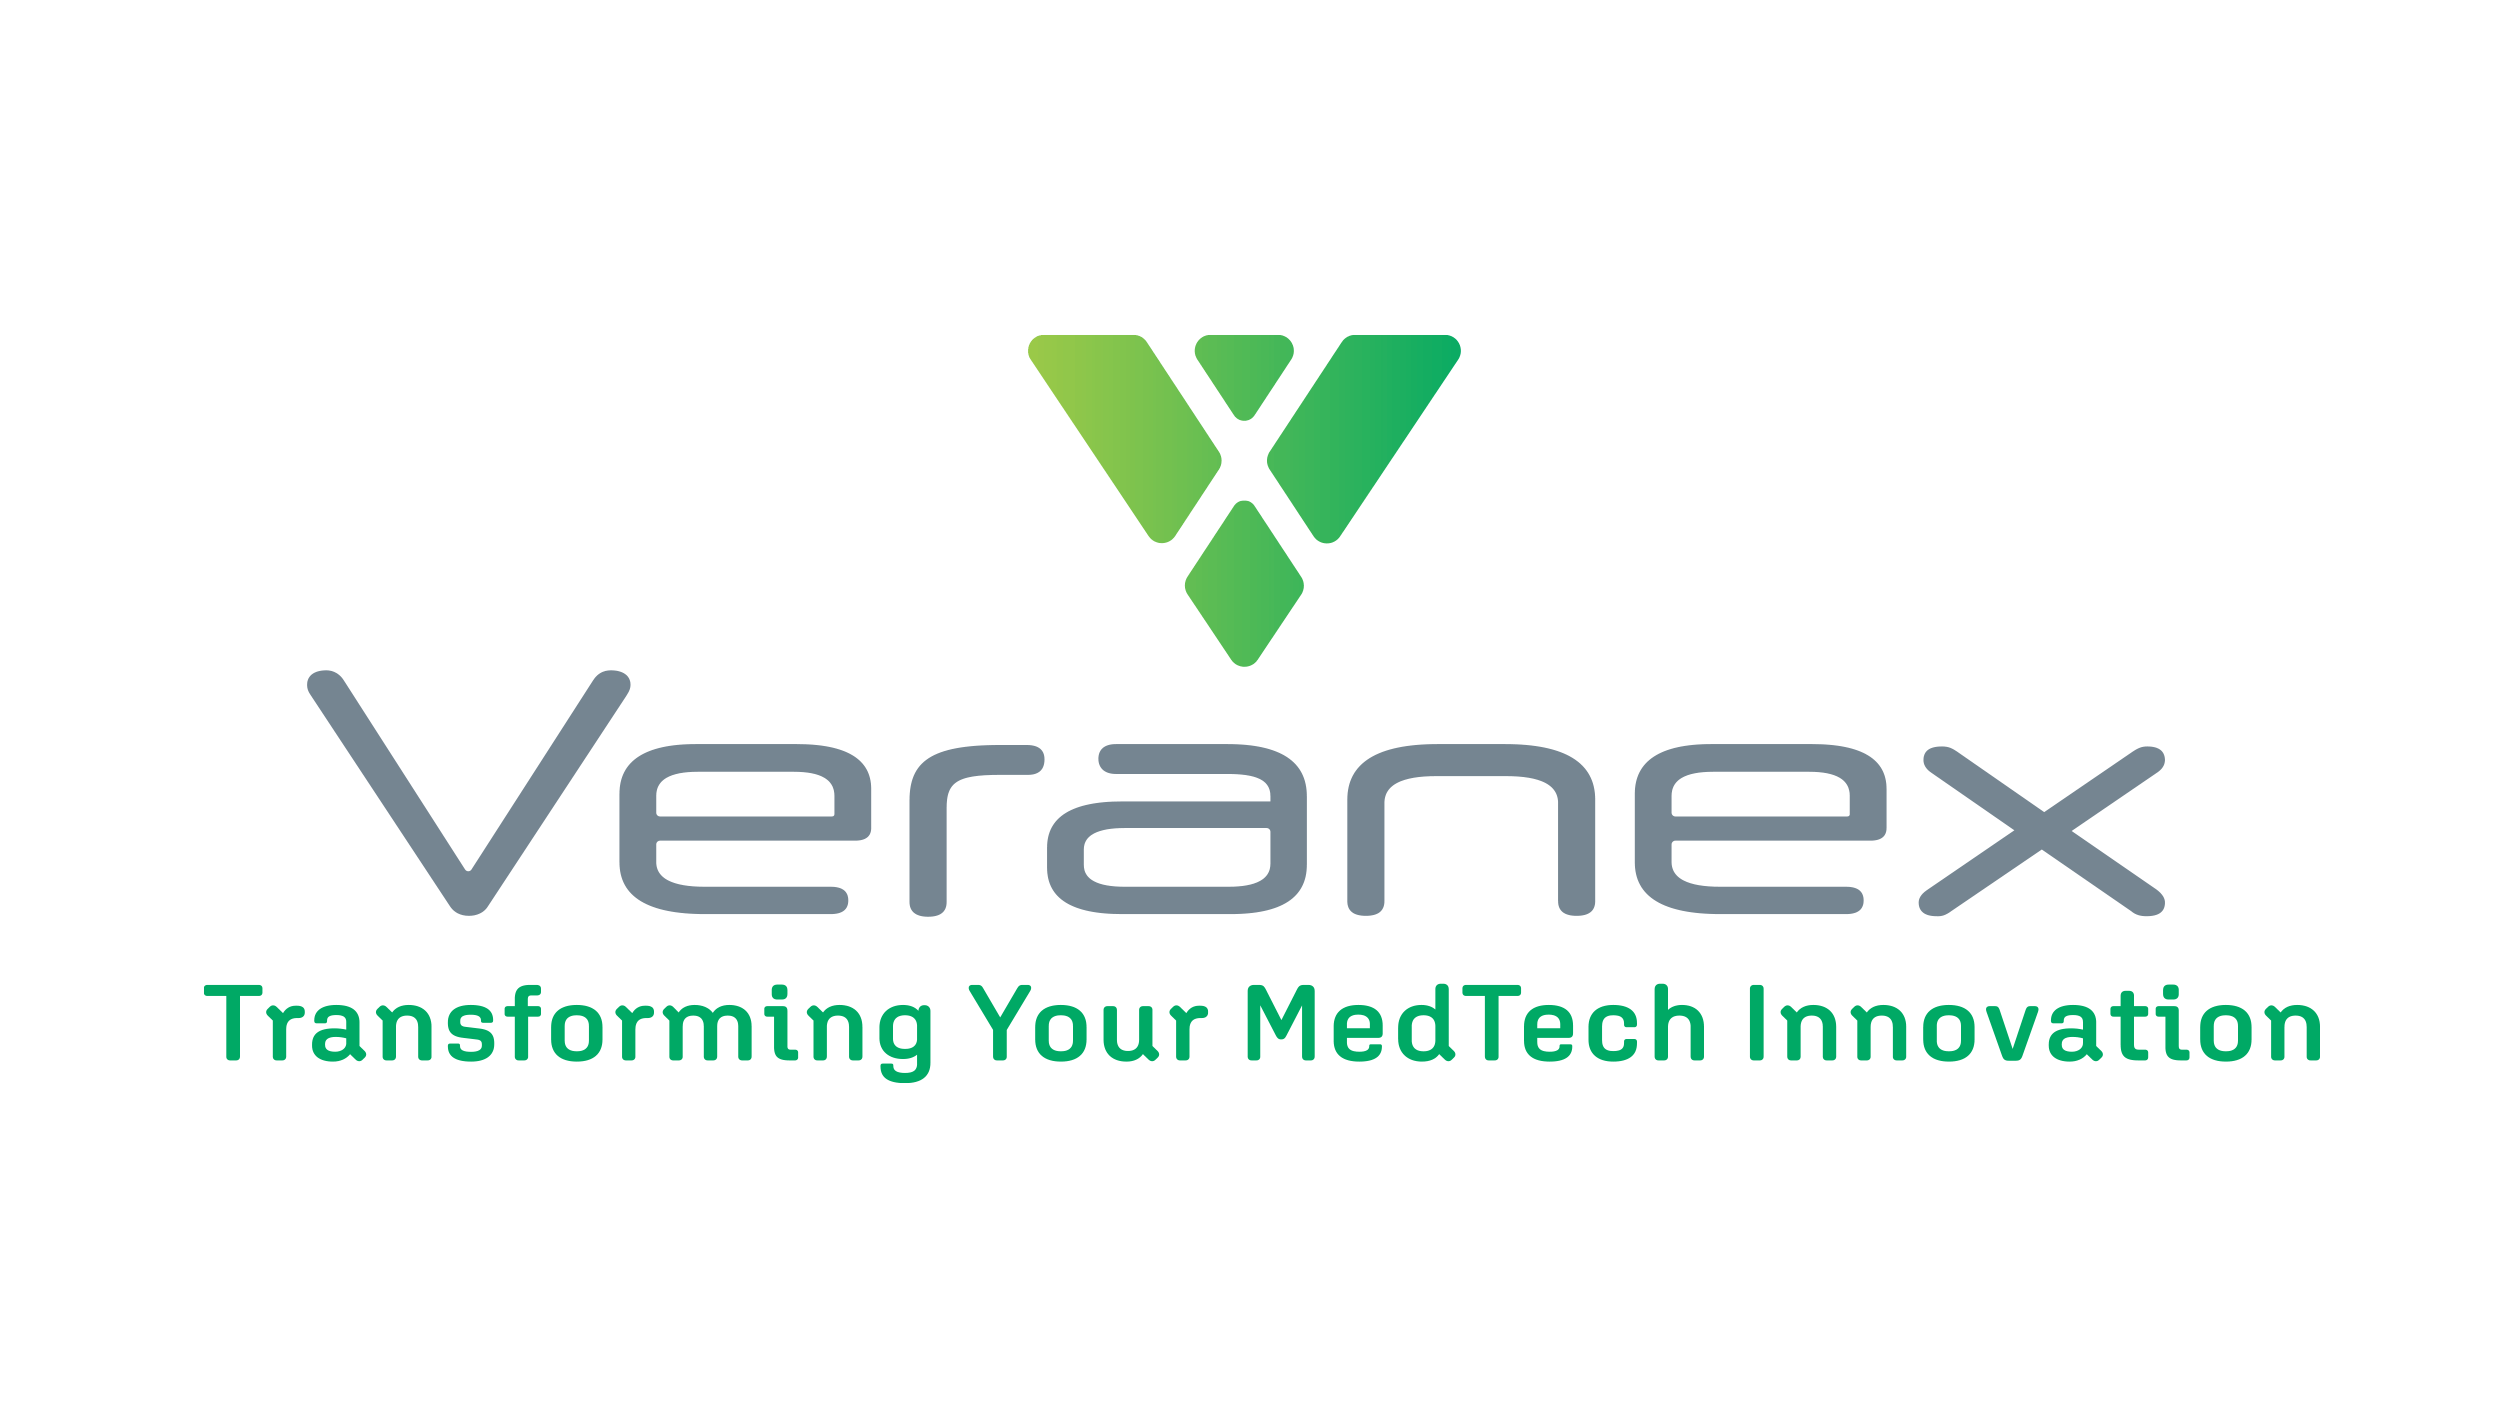 Veranex Acquires Devicia and Clarvin, Expanding Regulatory, Quality, and Clinical Expertise for IVD and Medical Devices